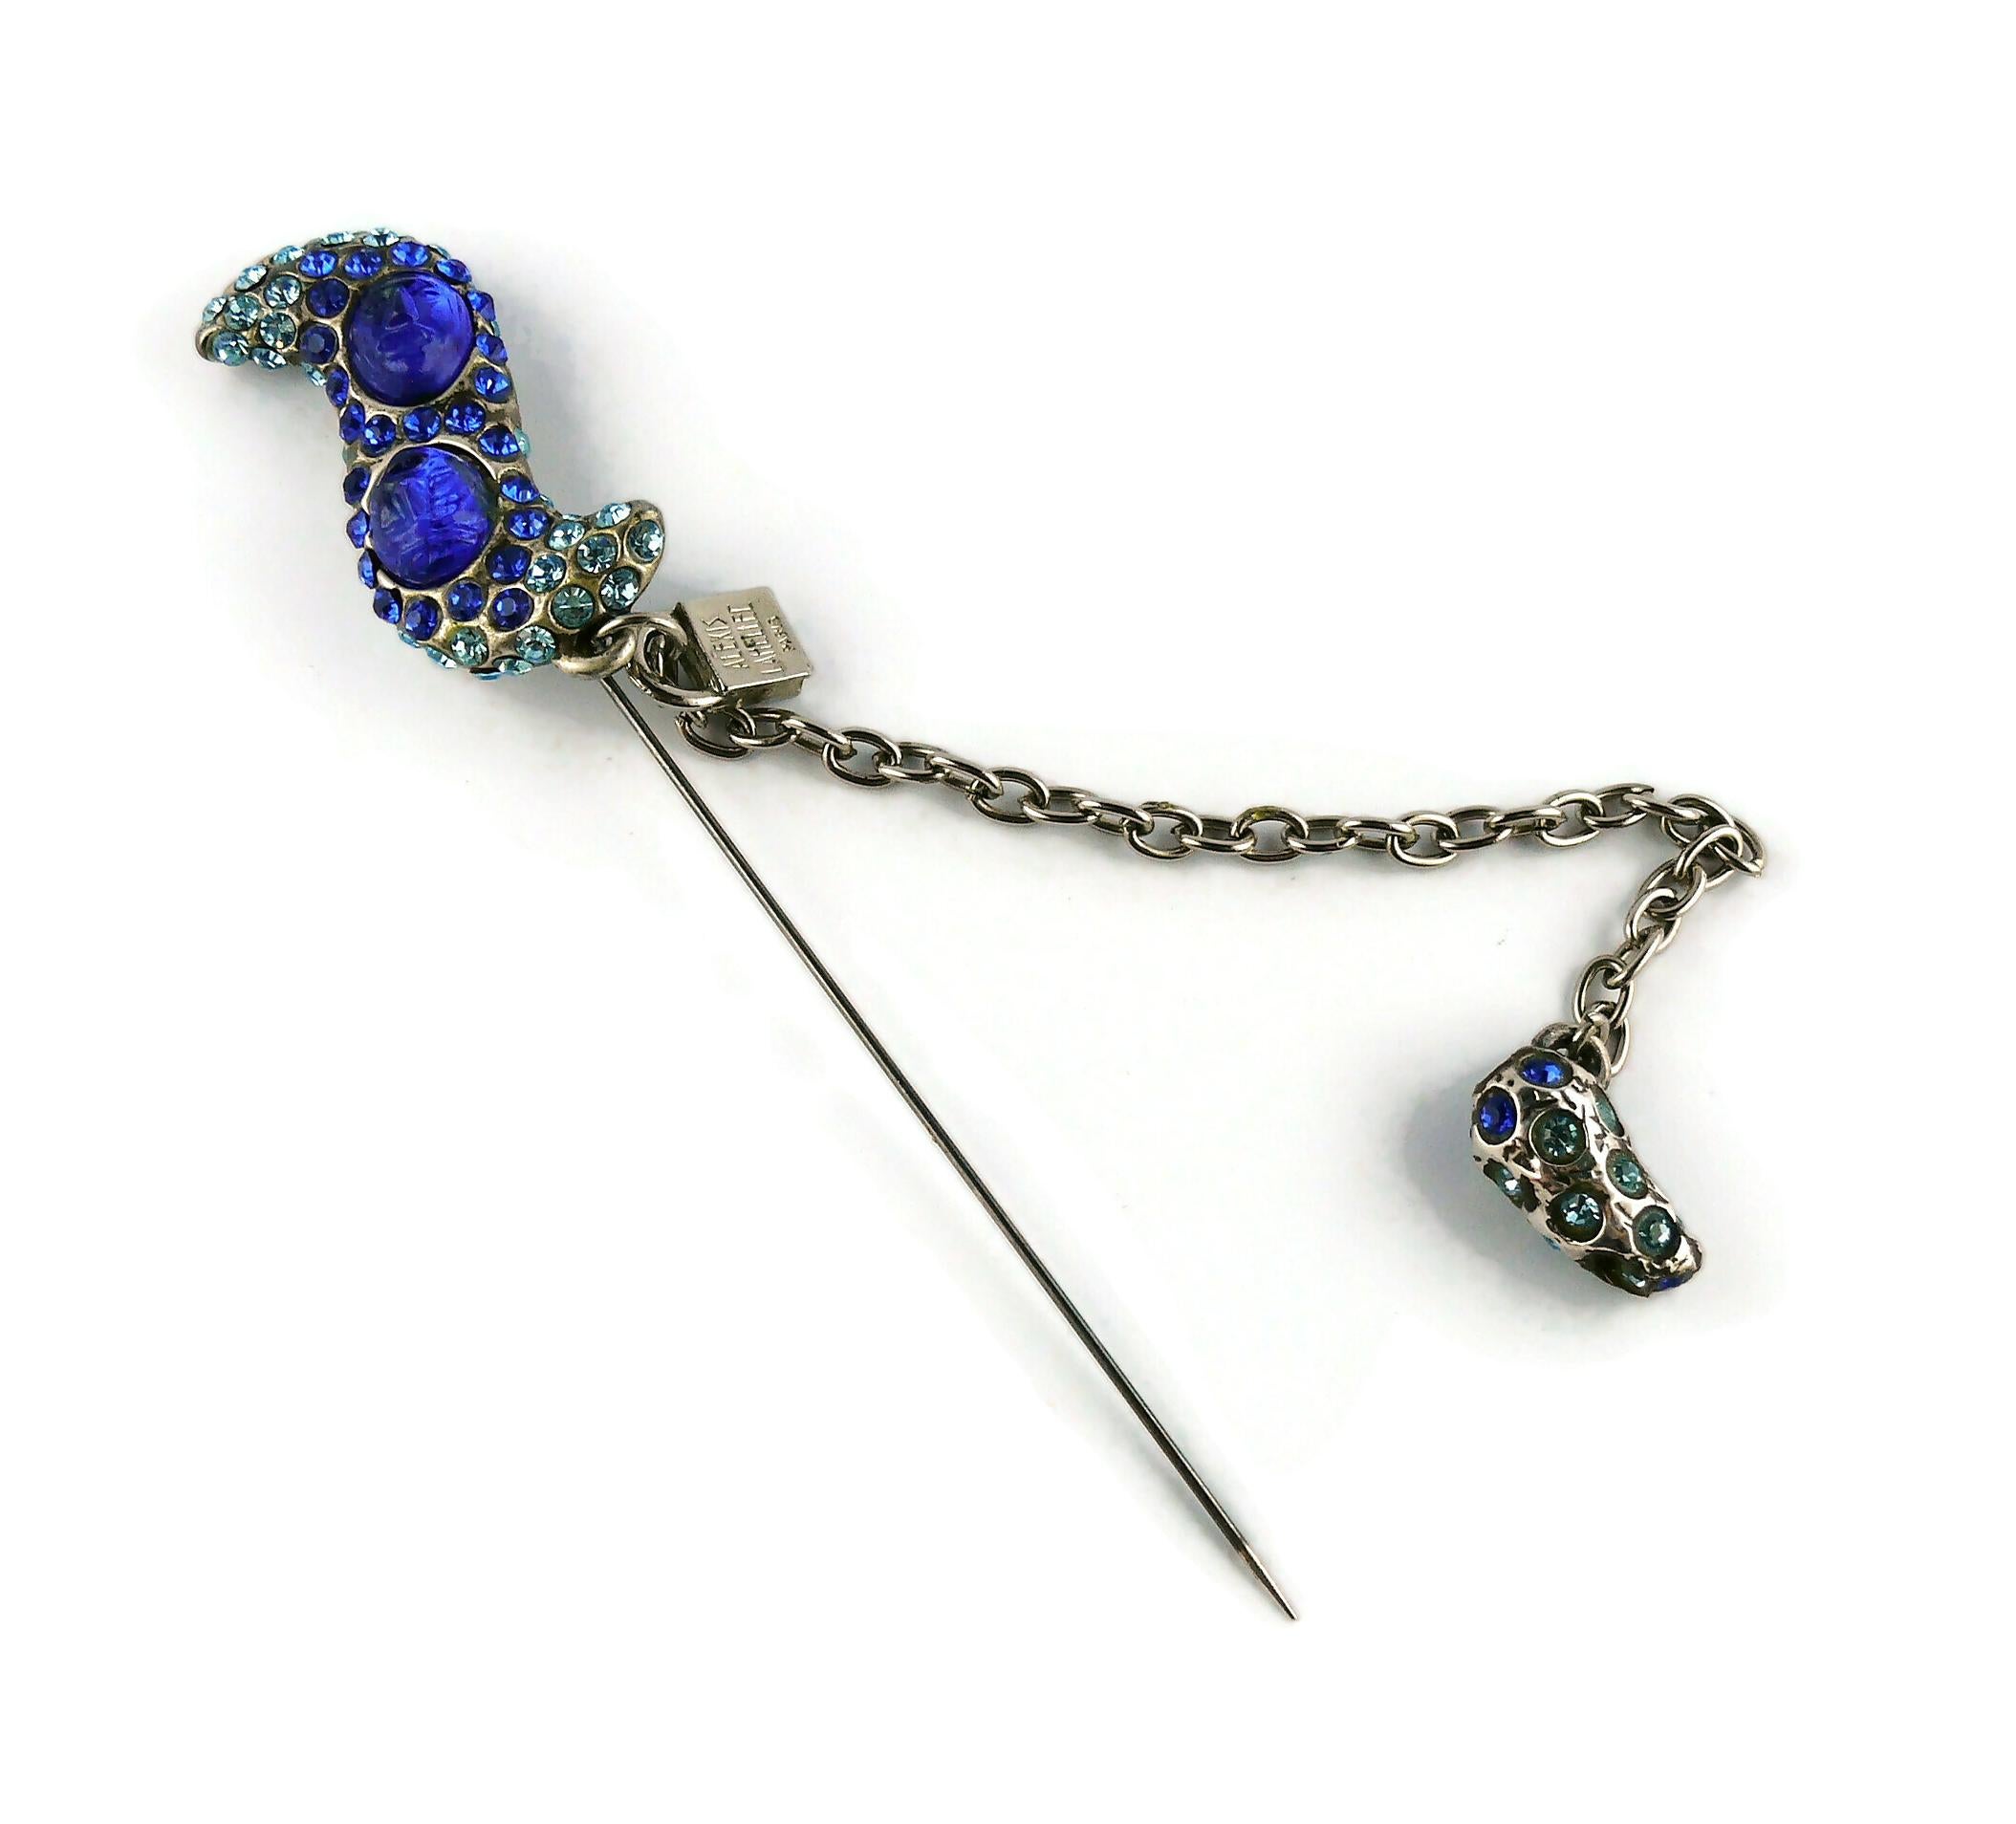 Alexis Lahellec Vintage Oversized Jewelled Pin Brooch For Sale 2